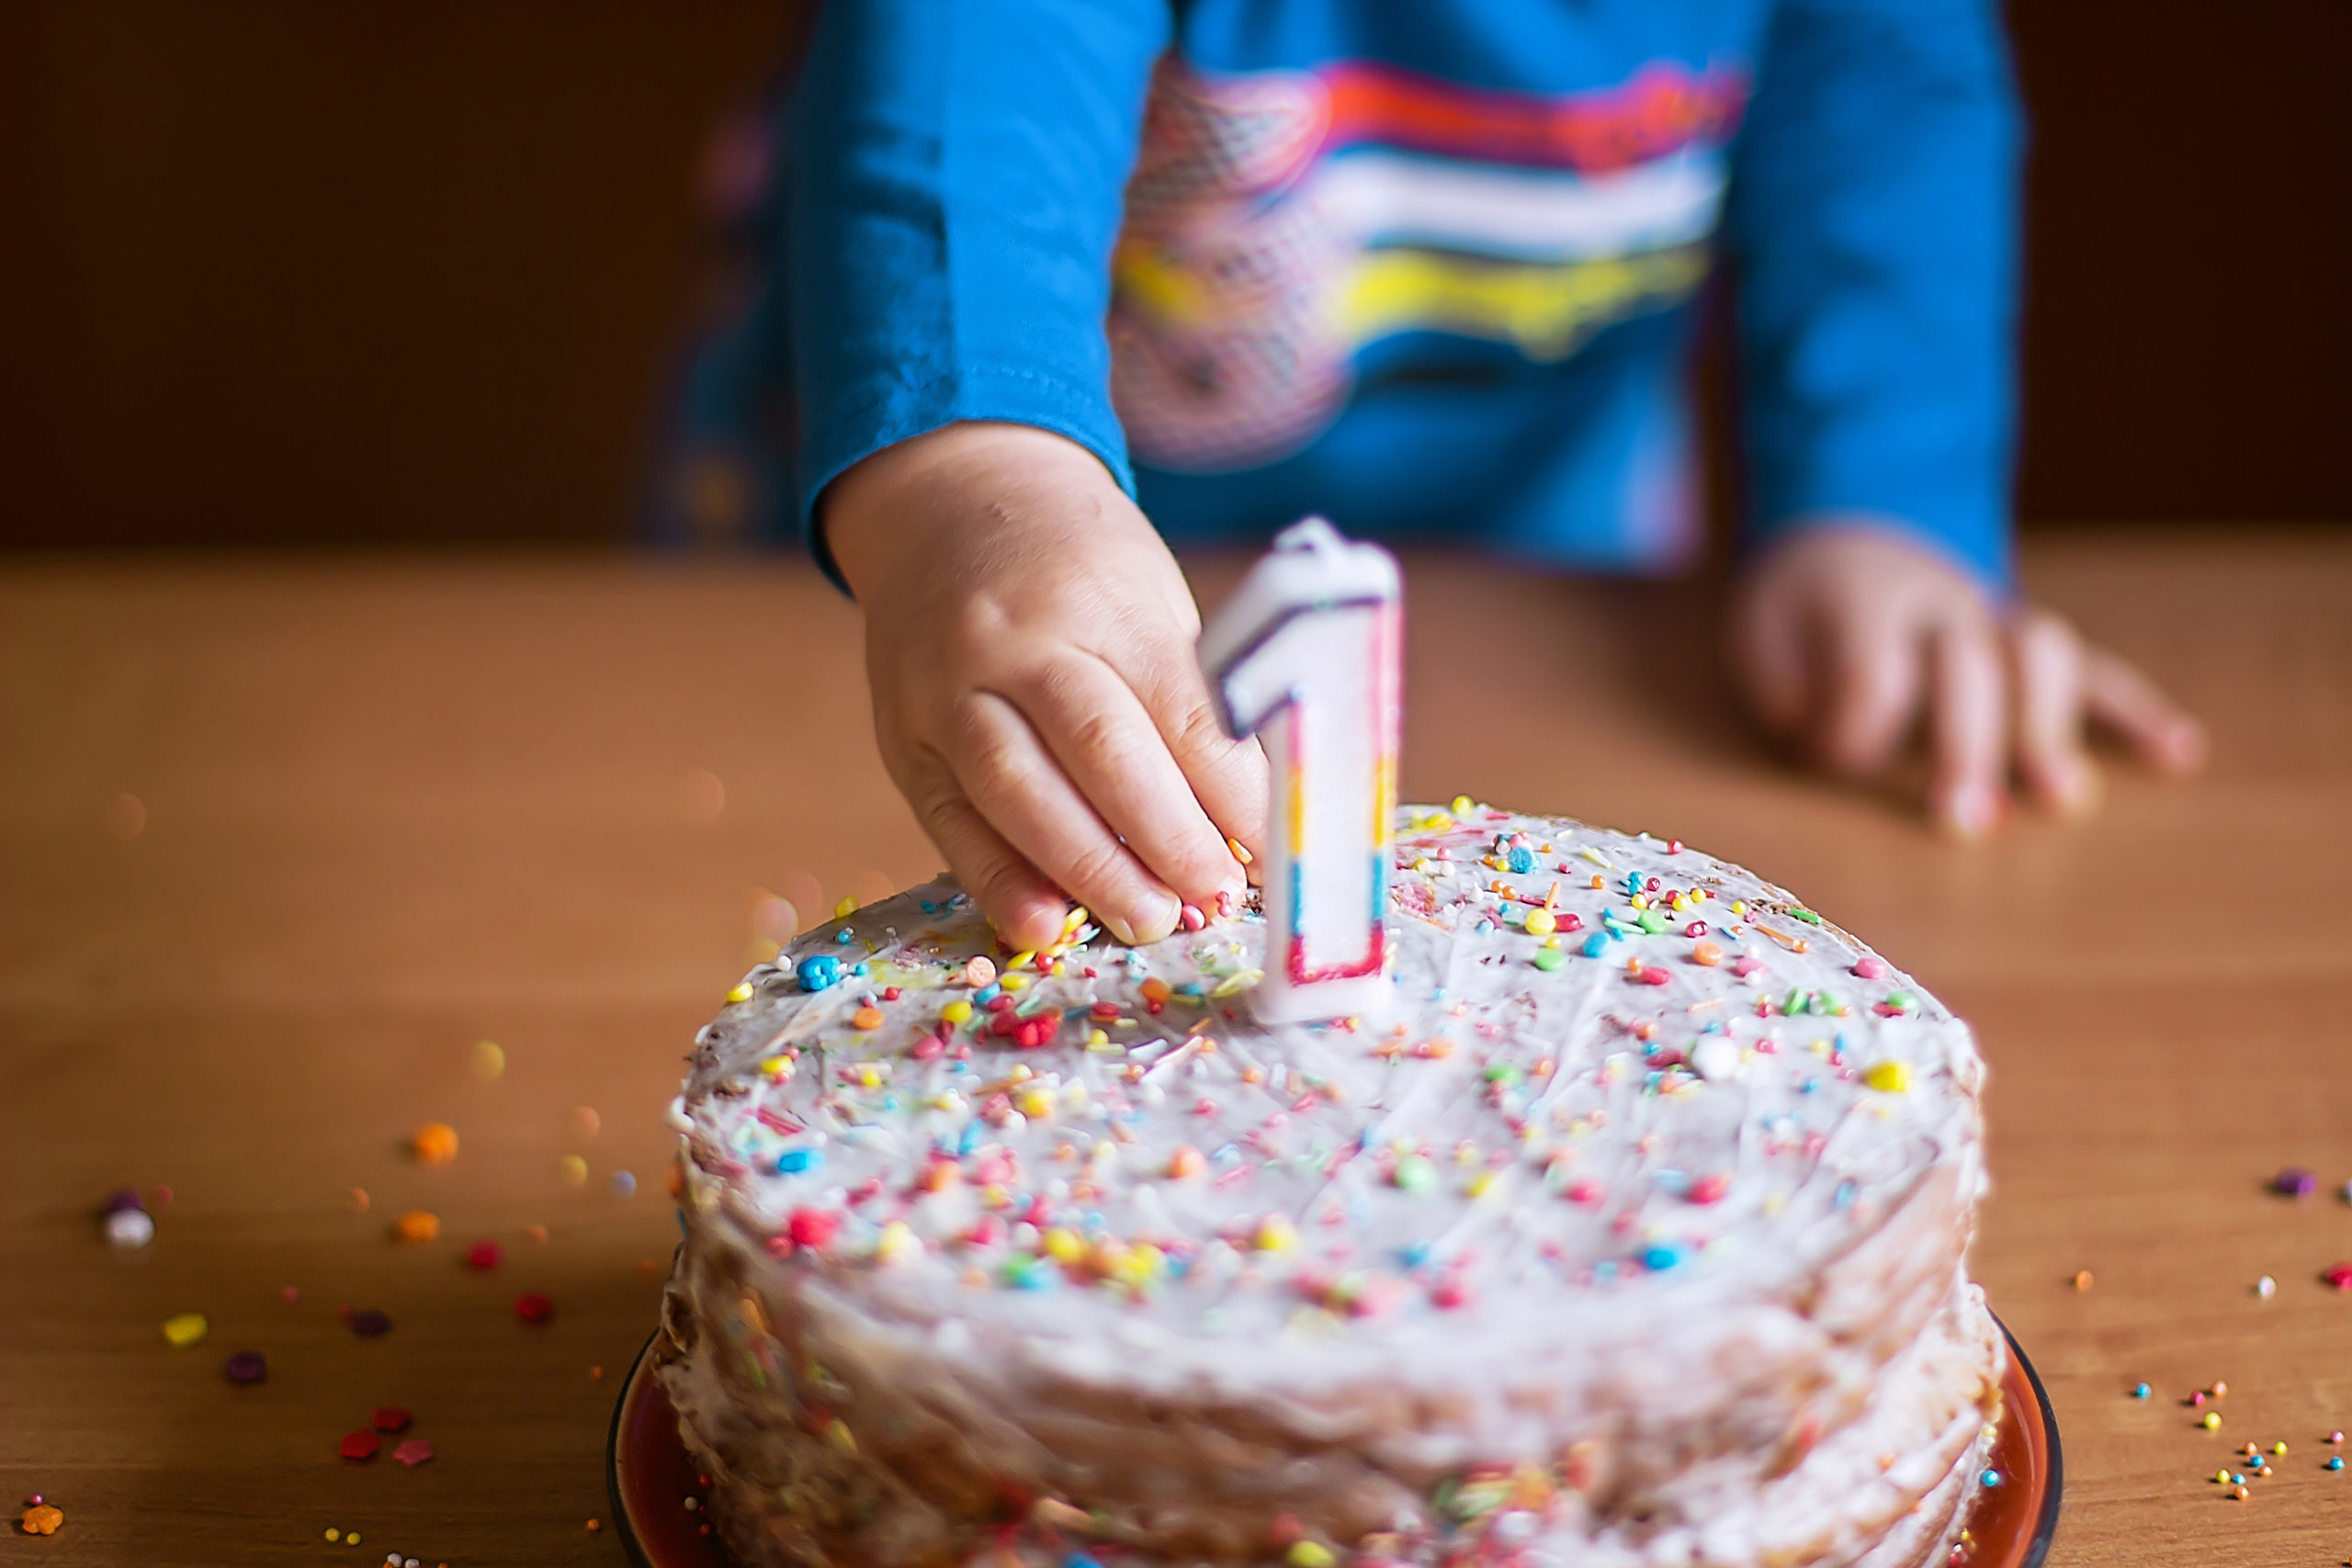 Cake or Cupcakes? Booze? Games? A Guide to Your Kid’s First Birthday